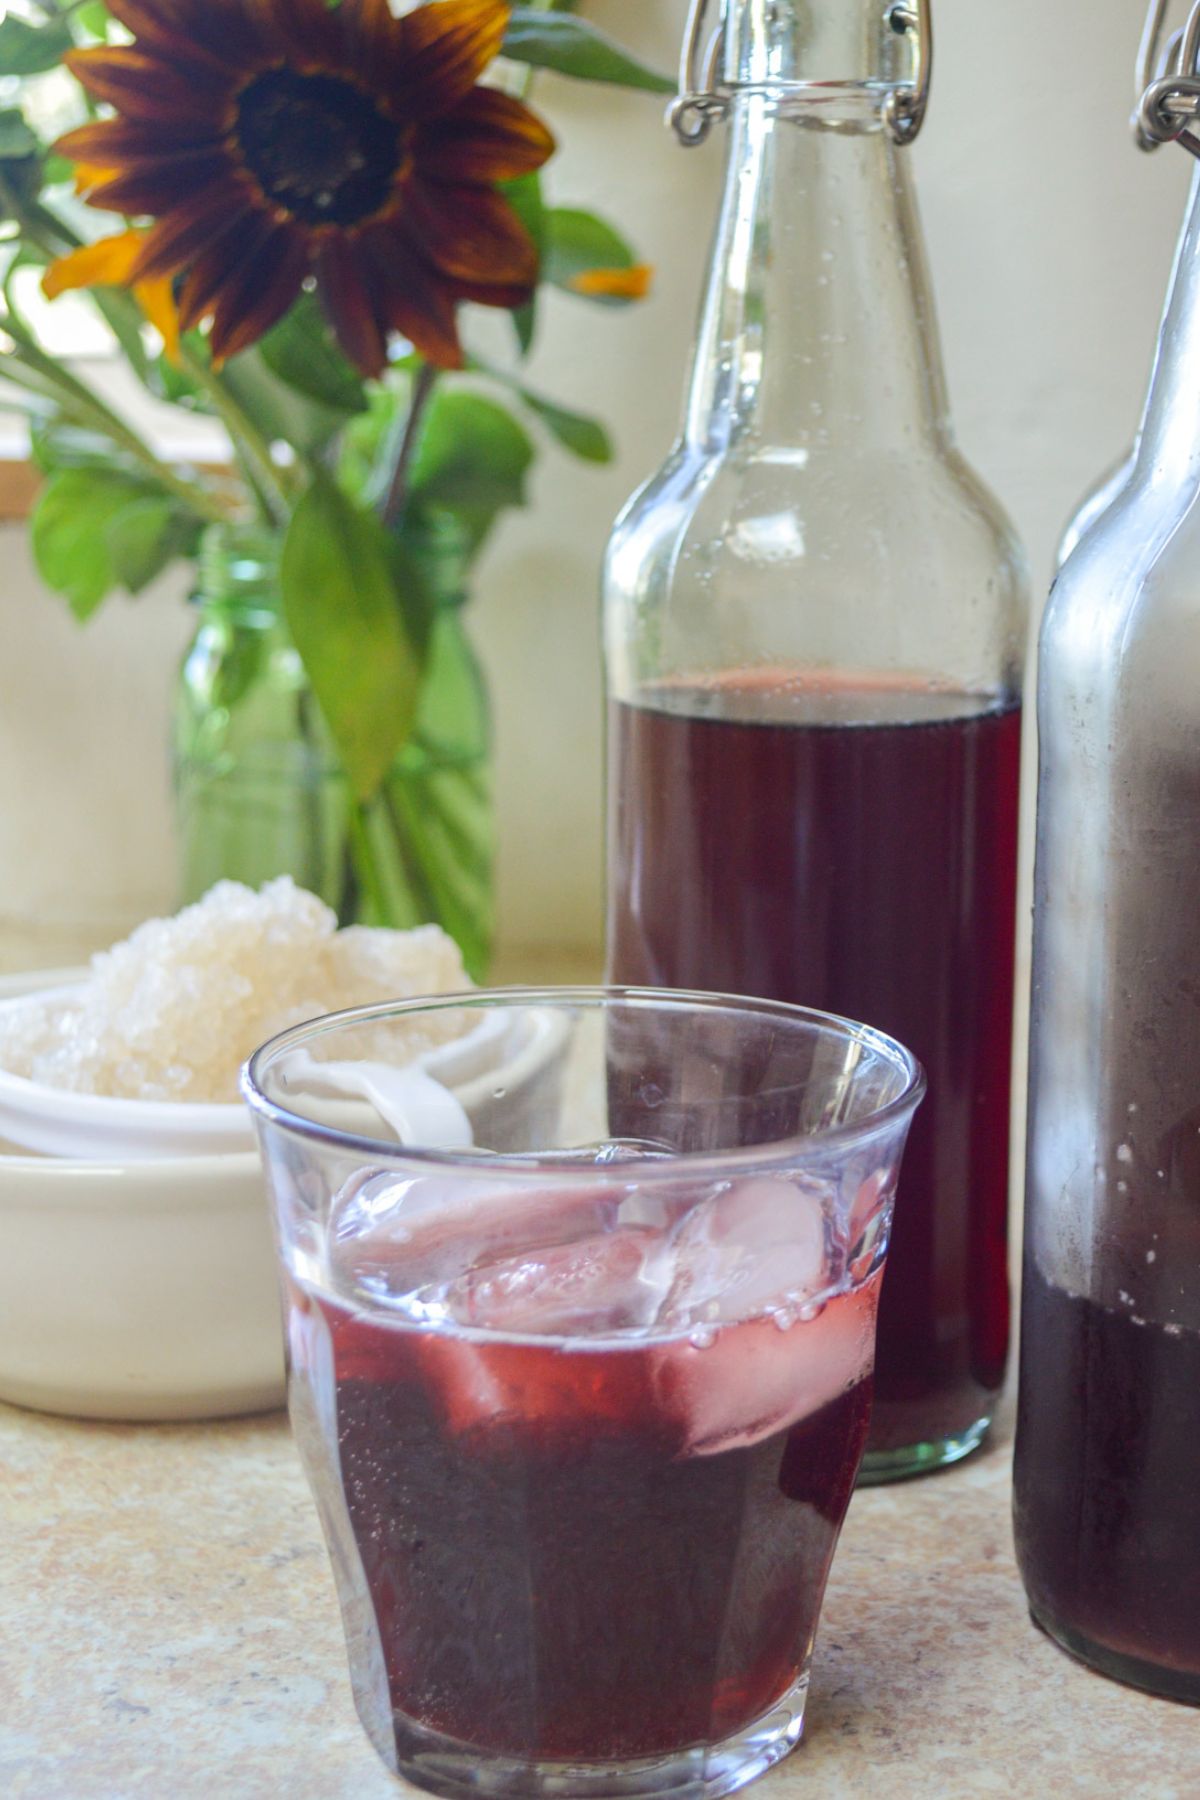 cherry water kefir in glass with bottles